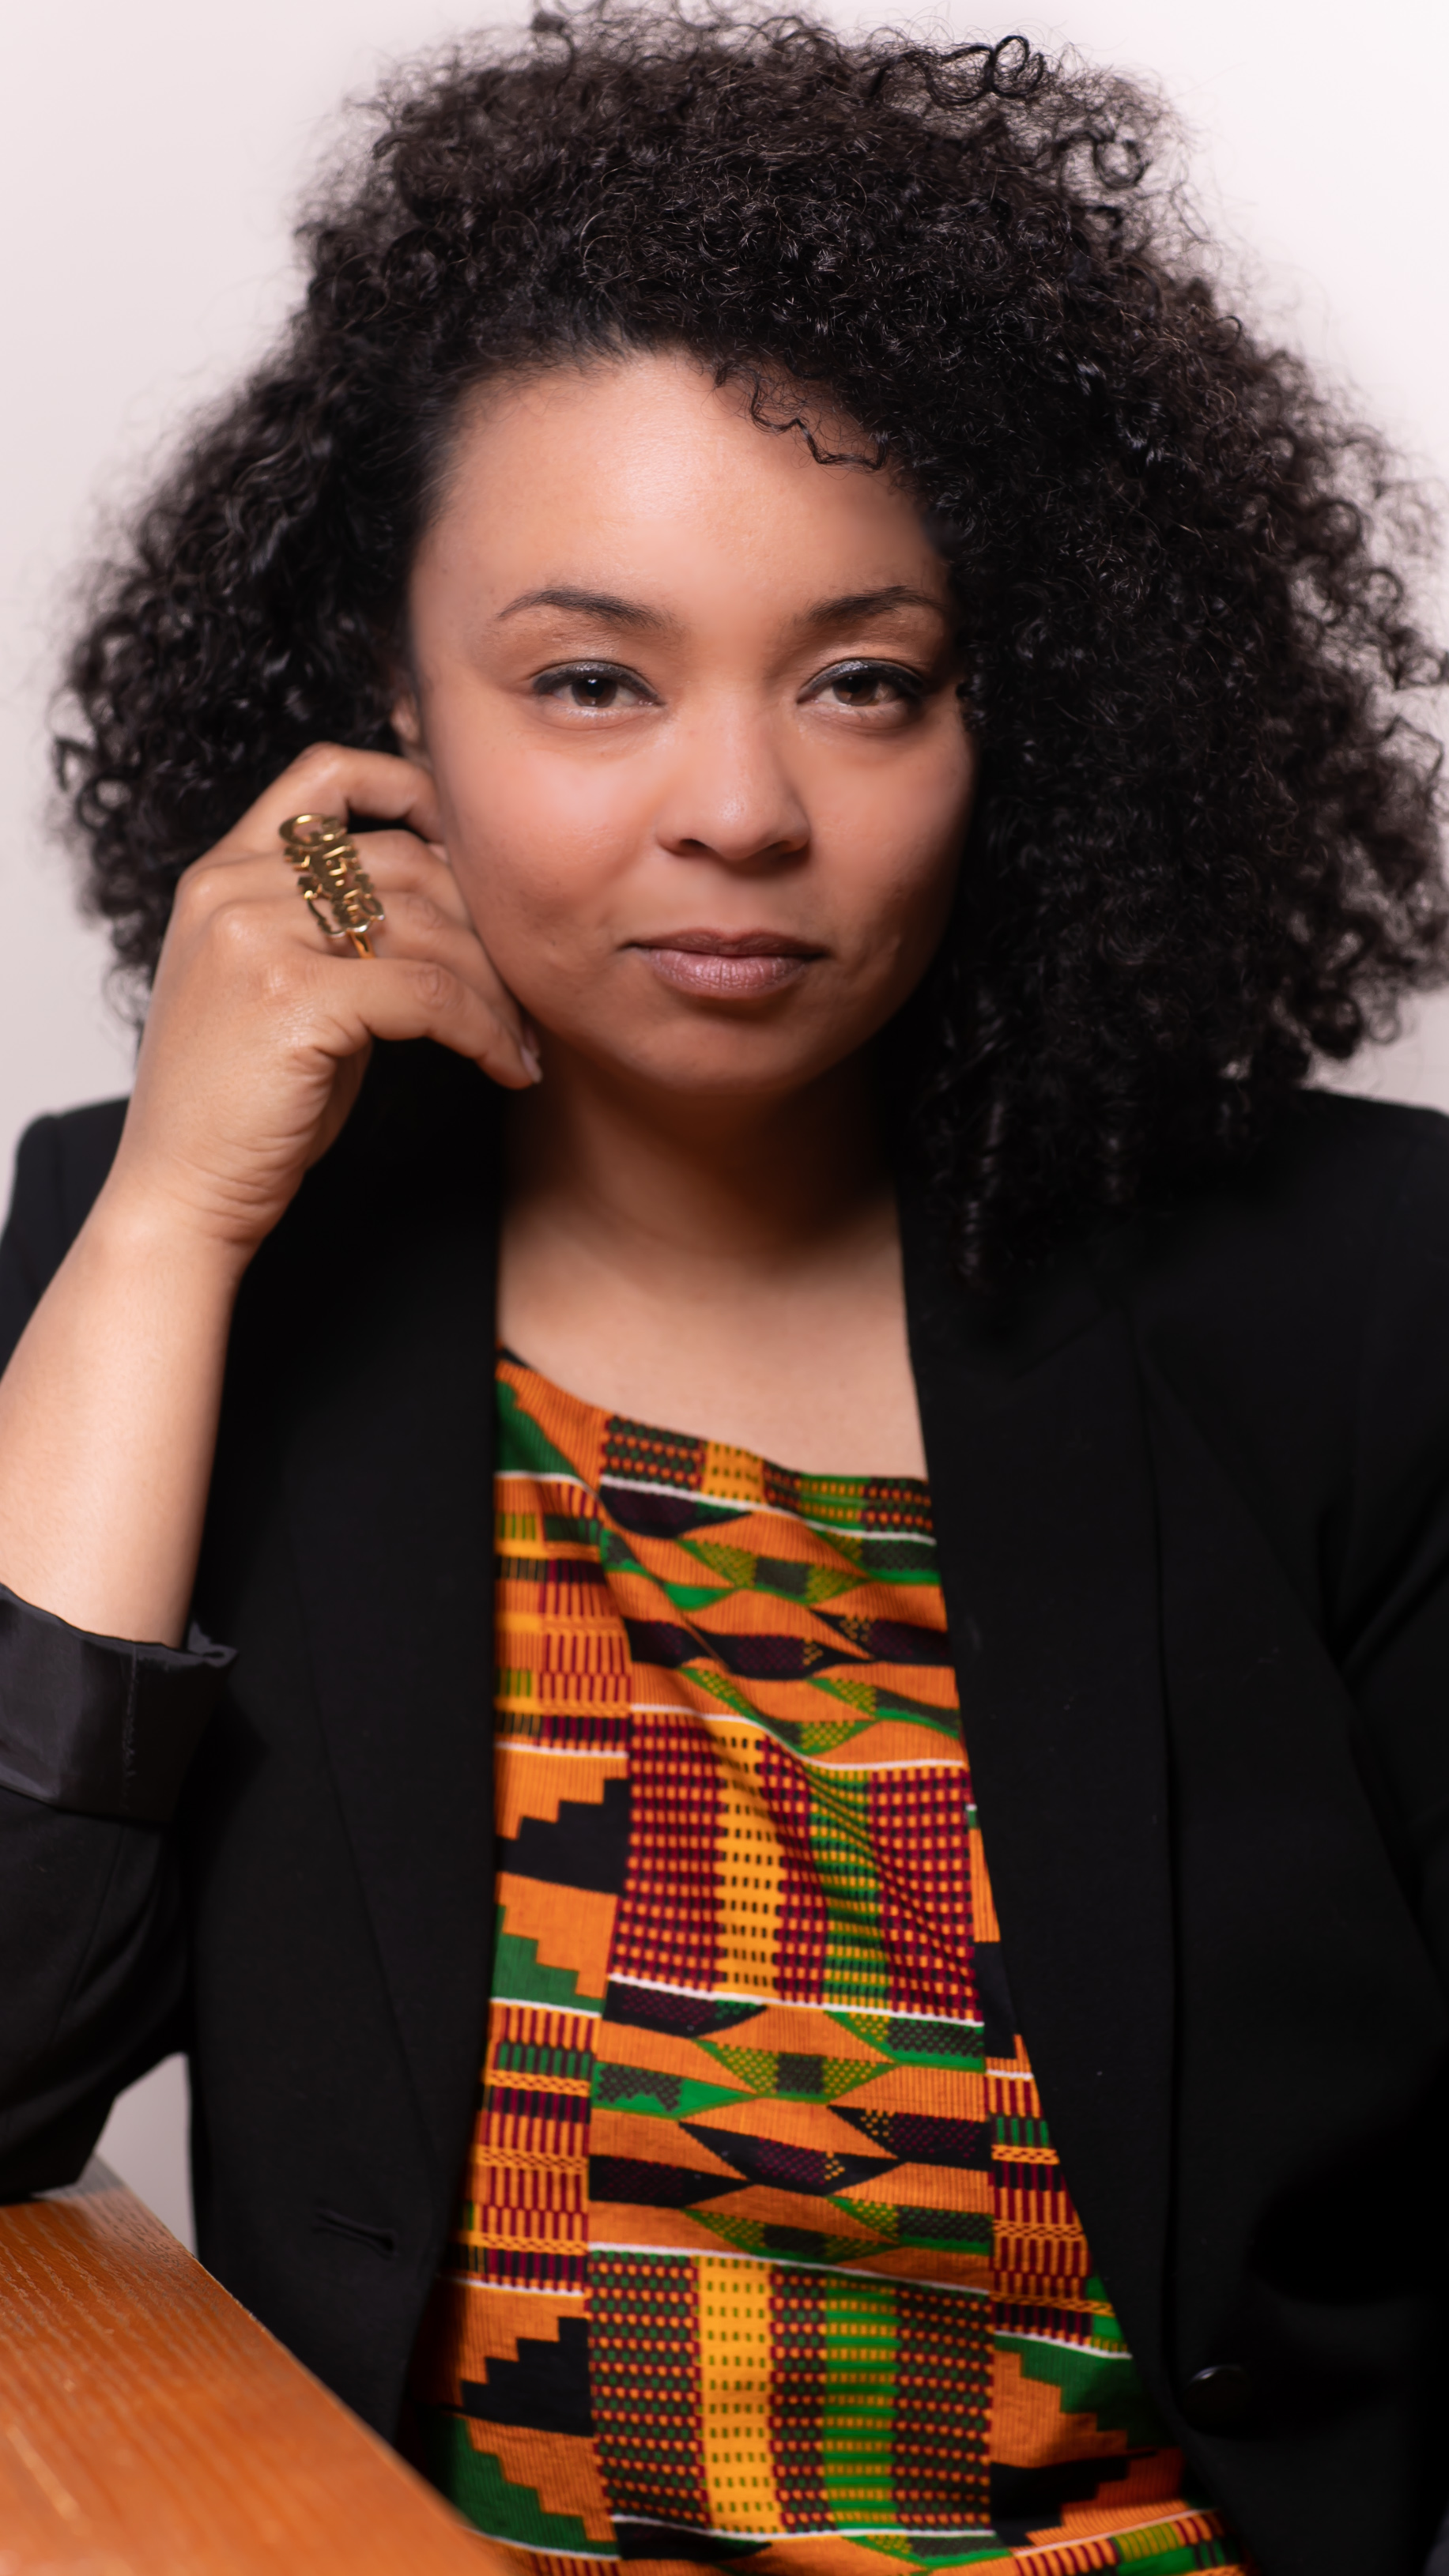 Stephanie is a visual storyteller and entrepreneur. She is a photojournalist, radio commentator, start-up branding consultant and travel industry expert regarding the African diaspora.